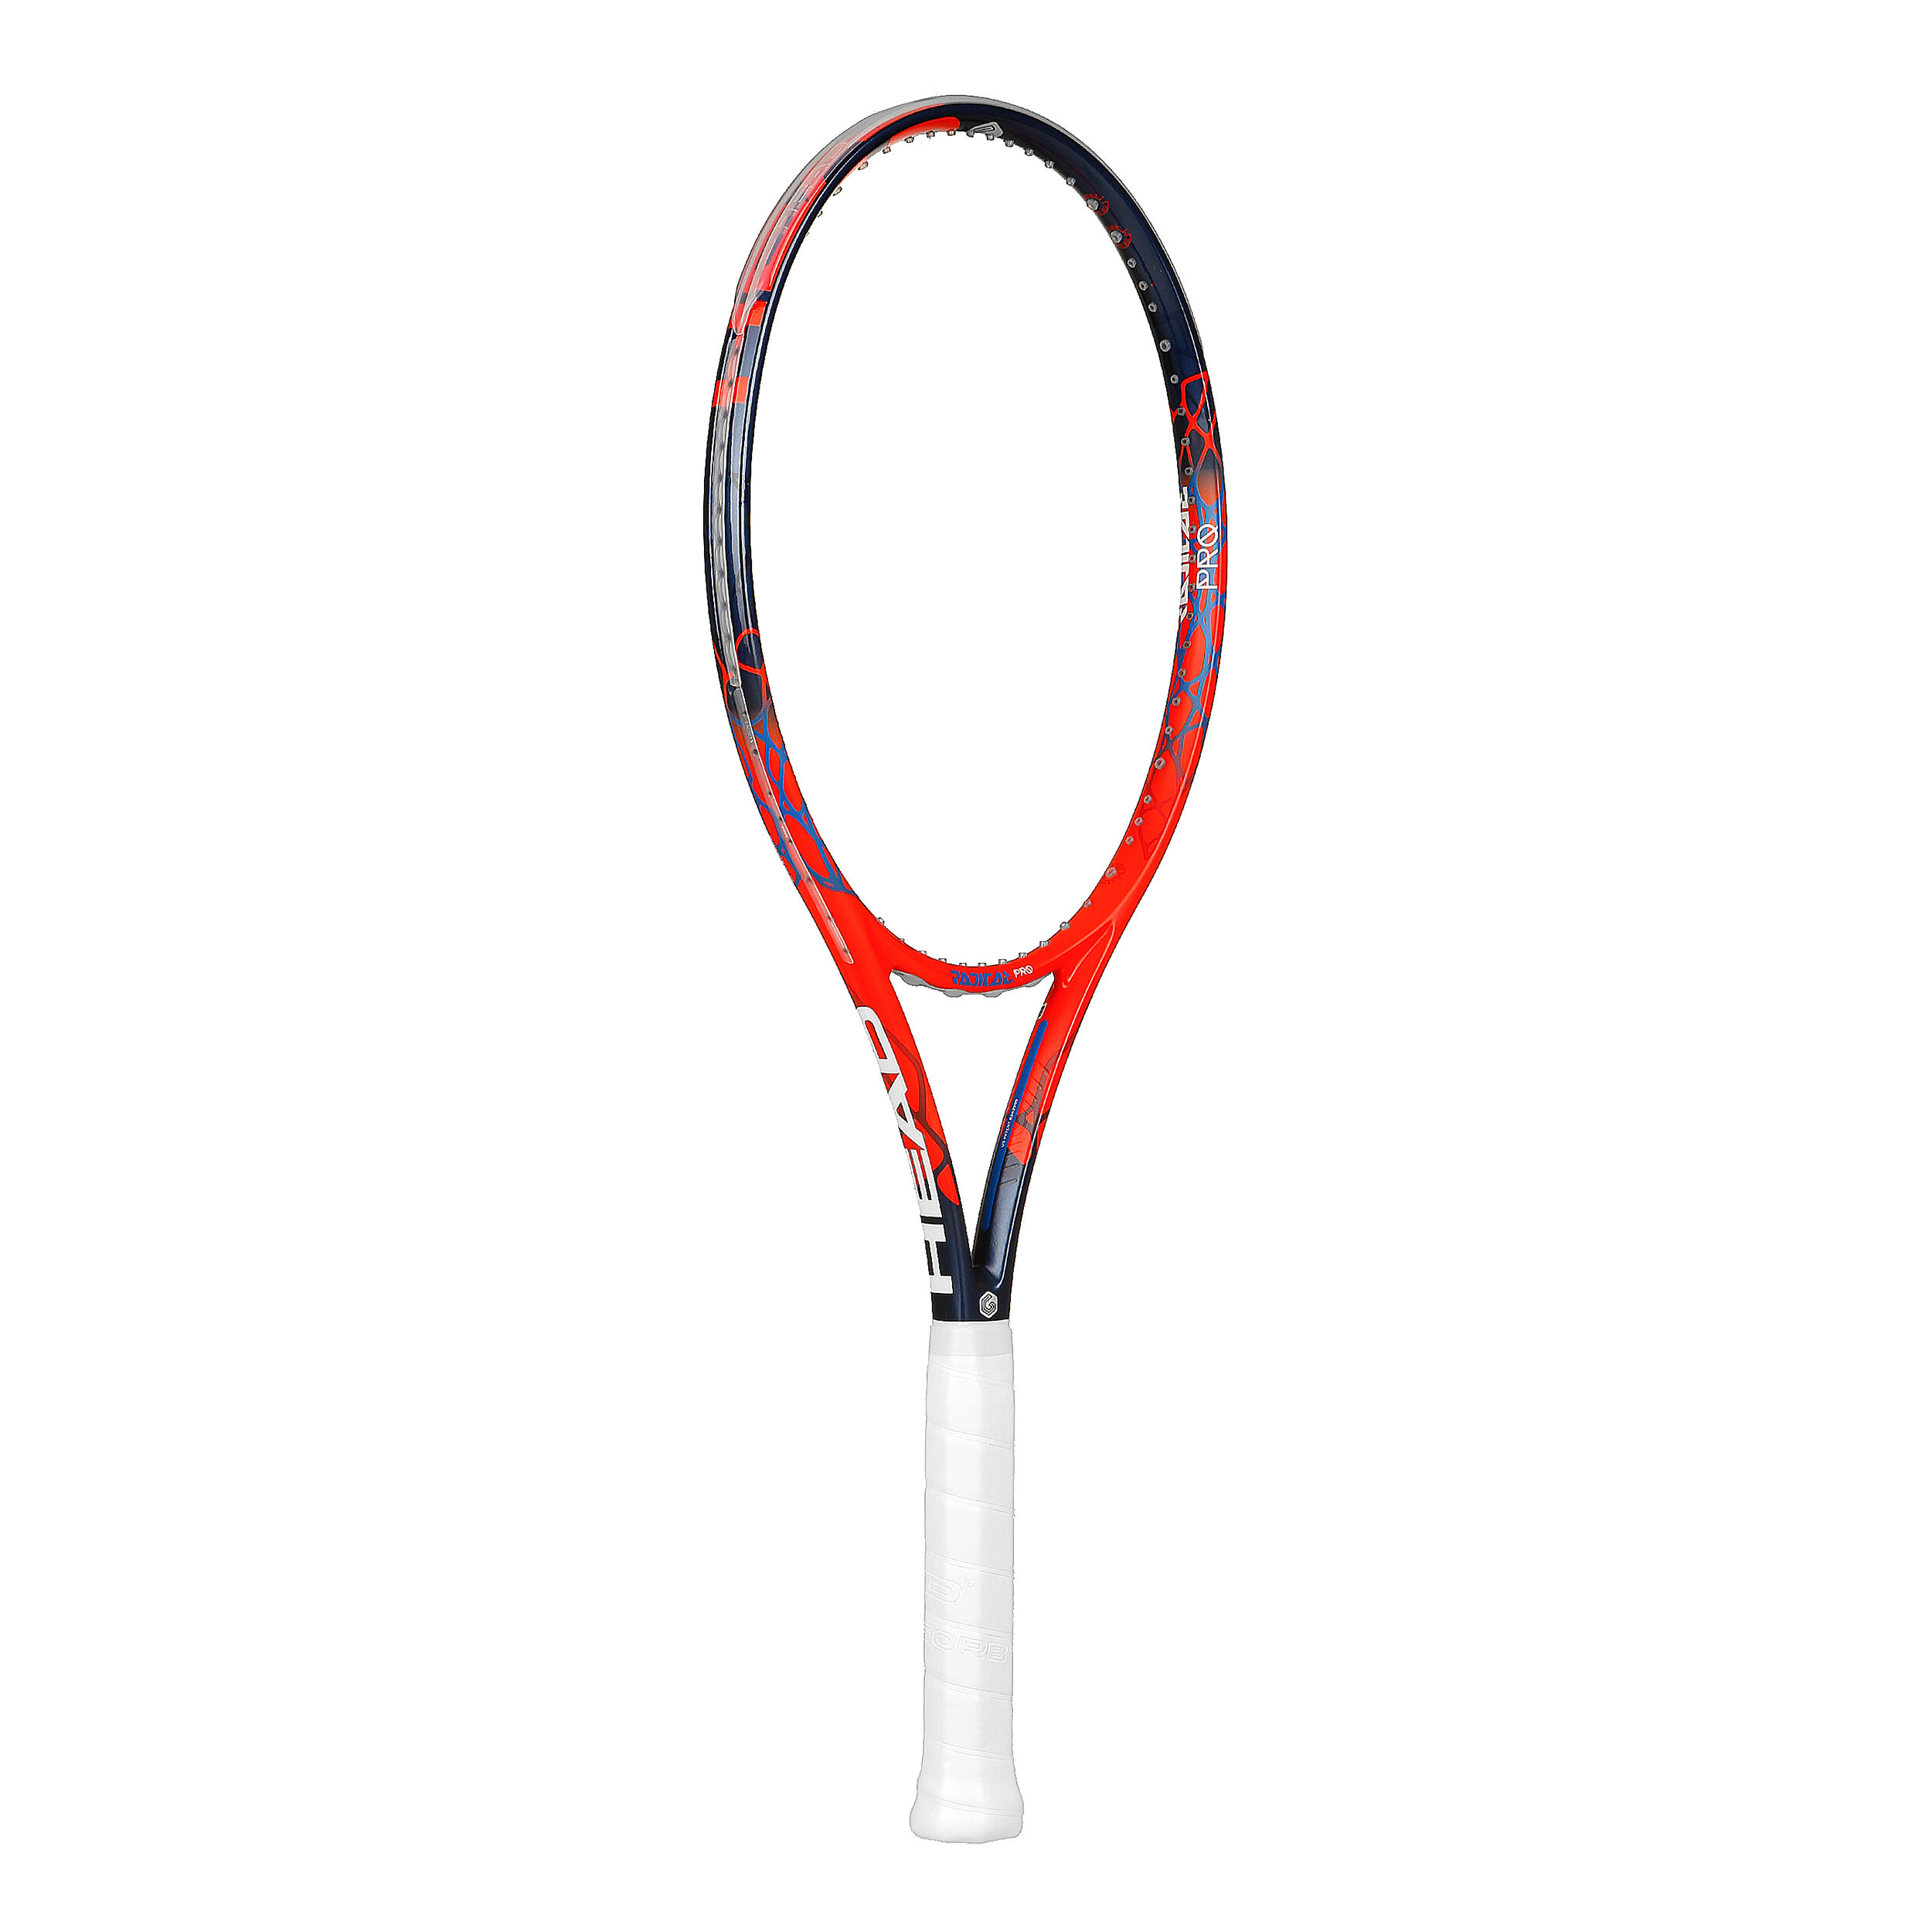 Buy HEAD Graphene Touch Radical Pro Tour Racket (used) online